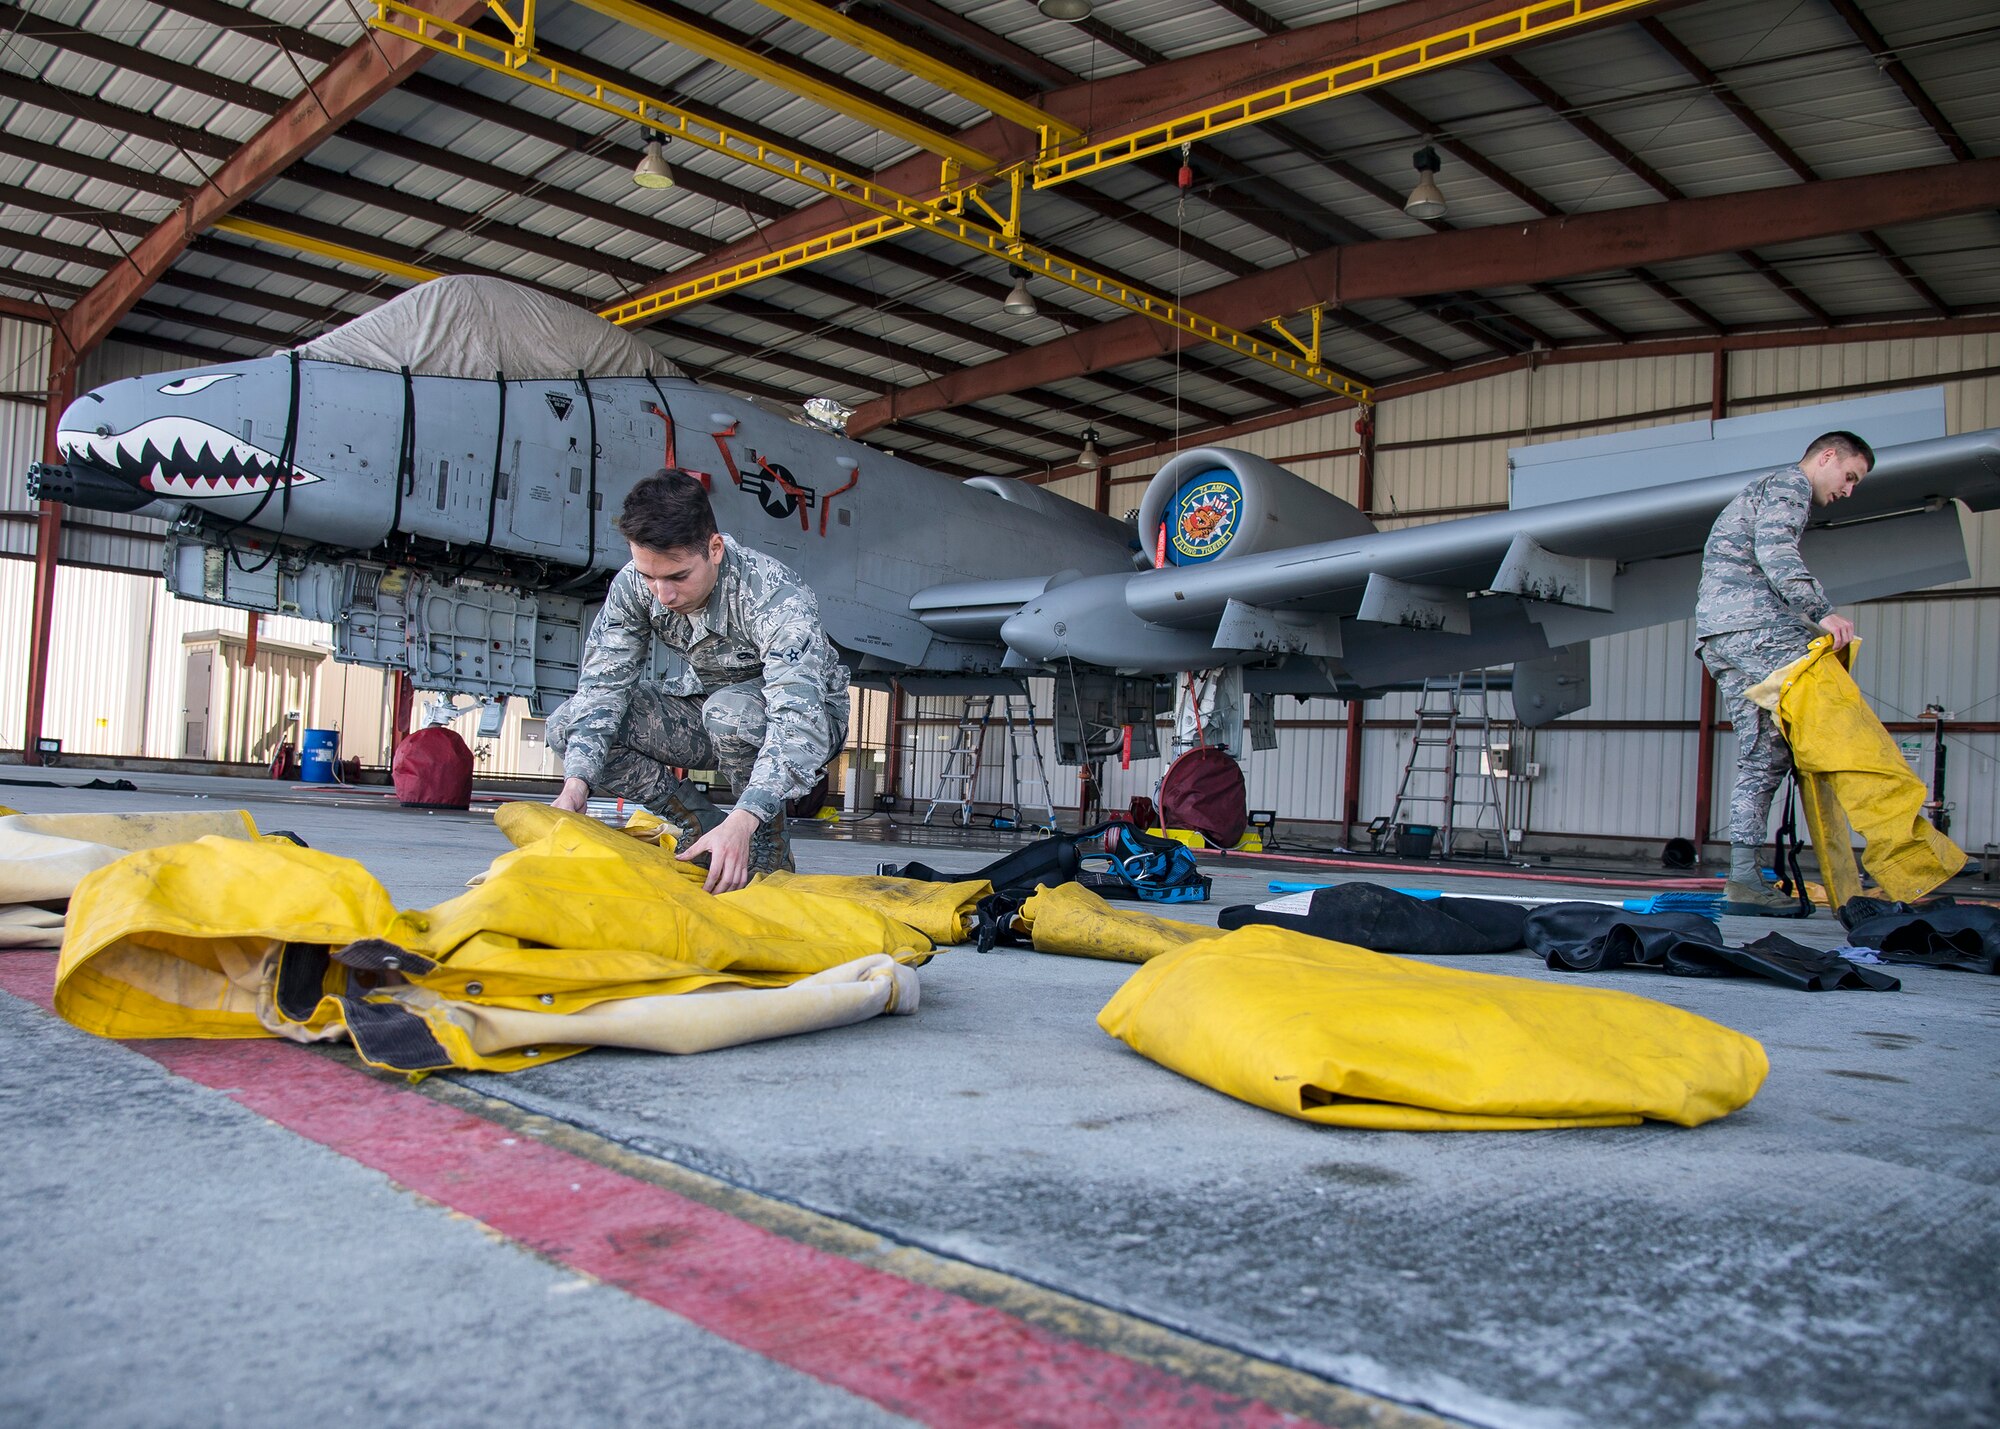 Airmen from the 23d Maintenance Group put on personal protective equipment prior to an A-10C Thunderbolt II wash, Feb. 25, 2019, at Moody Air Force Base, Ga. On top of their daily scheduled maintenance a team of six Airmen dedicated over 10 hours washing the A-10 to ensure the aircraft was free of any surface or structural deficiencies that could present a safety hazard during flight. (U.S. Air Force photo by Airman 1st Class Eugene Oliver)